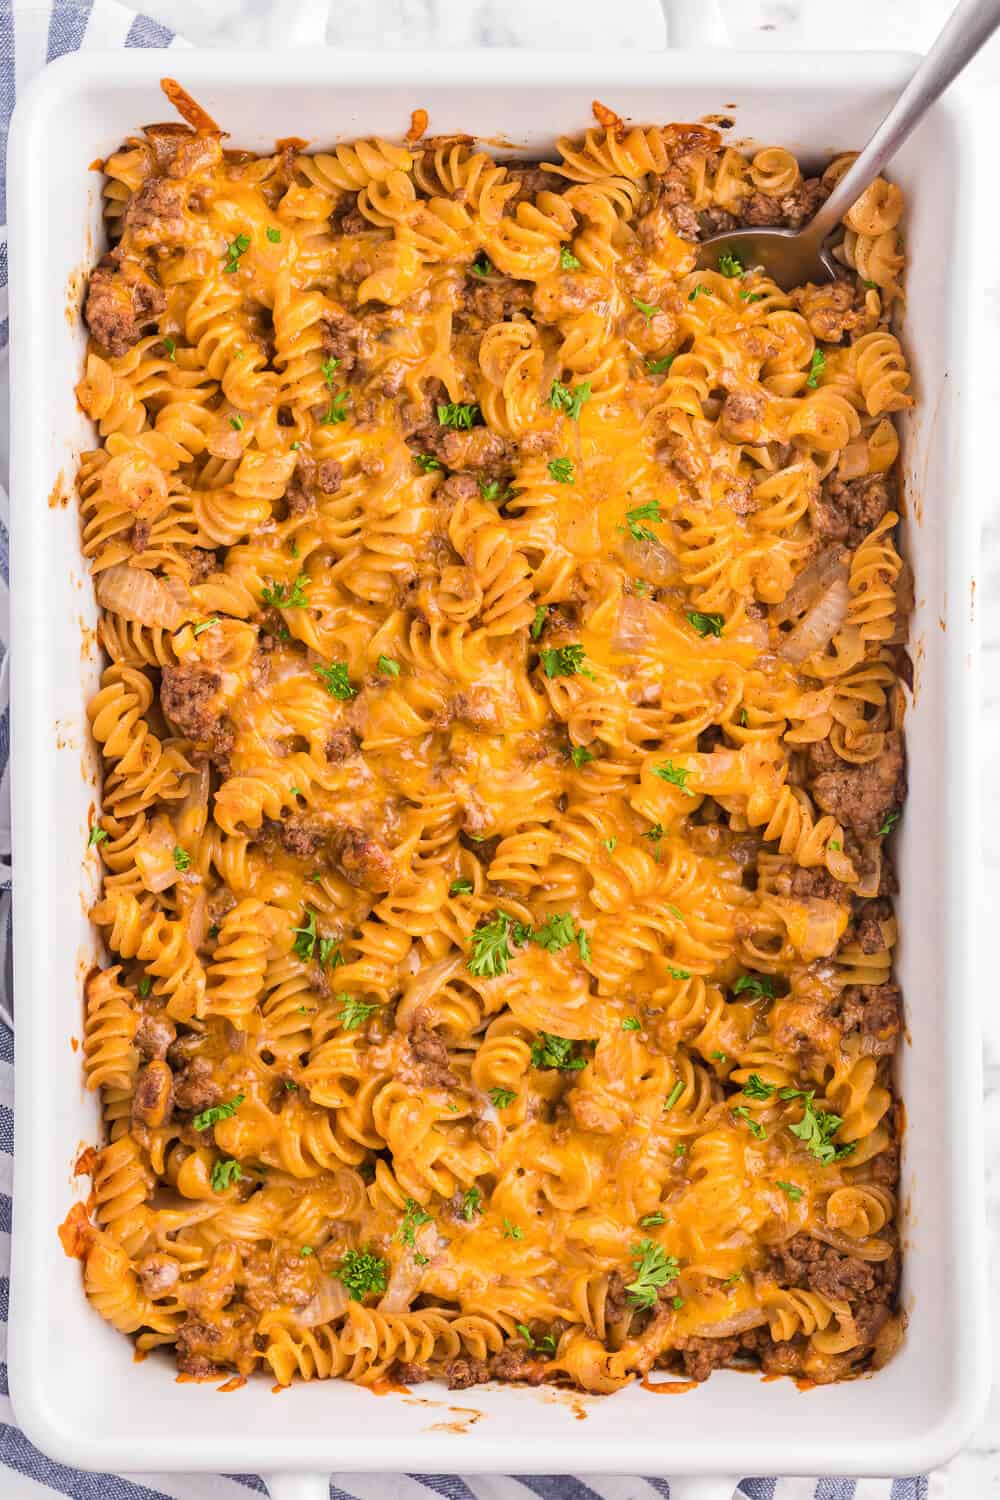 Cheesy BBQ Beef Casserole - Ground beef, cheese and tangy BBQ sauce create a quick, easy and cost-effective family meal that everyone is sure to enjoy. This dish is a great make-ahead meal, and makes a great lunch the next day!